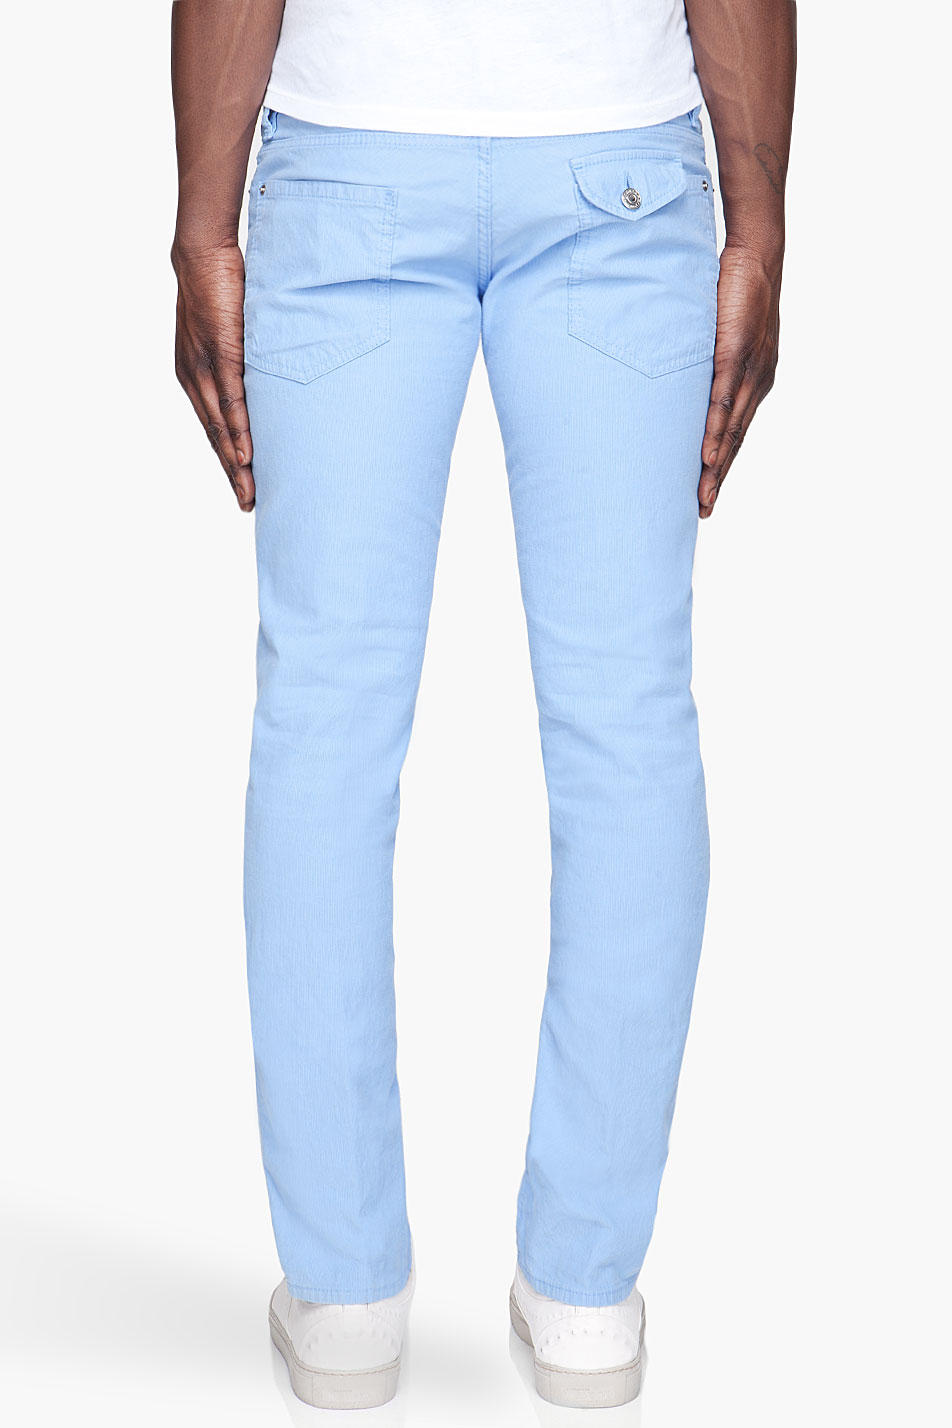 Dsquared² Periwinkle Blue Corduroy Jeans in Blue for Men | Lyst